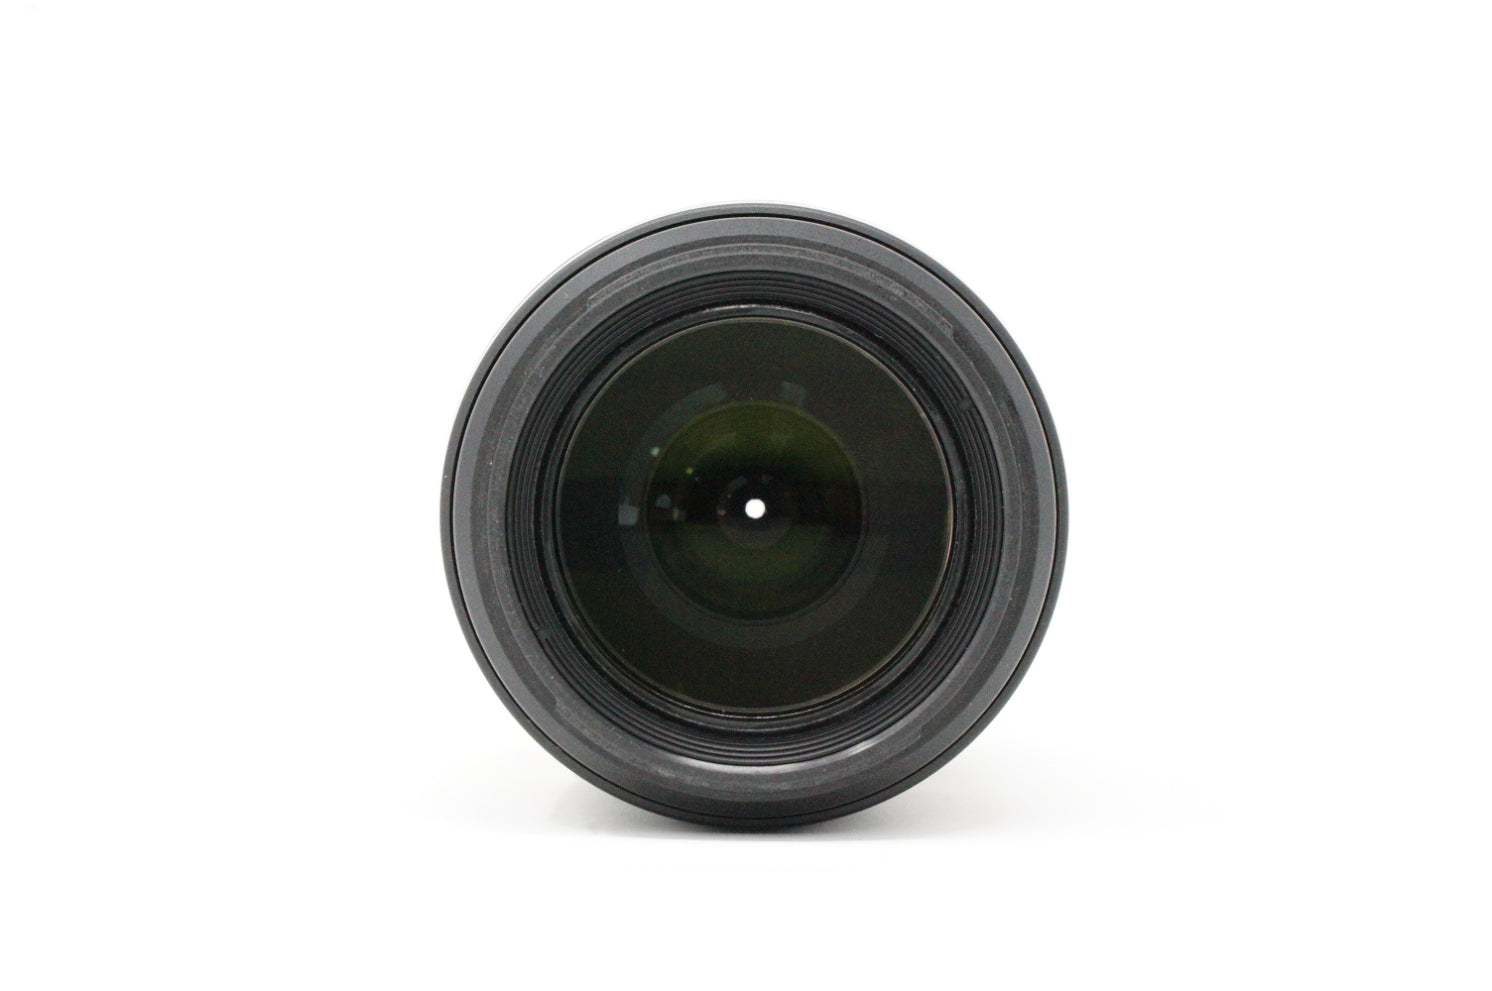 Used Tamron SP 70-300mm F4/5.6 VC lens in Nikon F mount